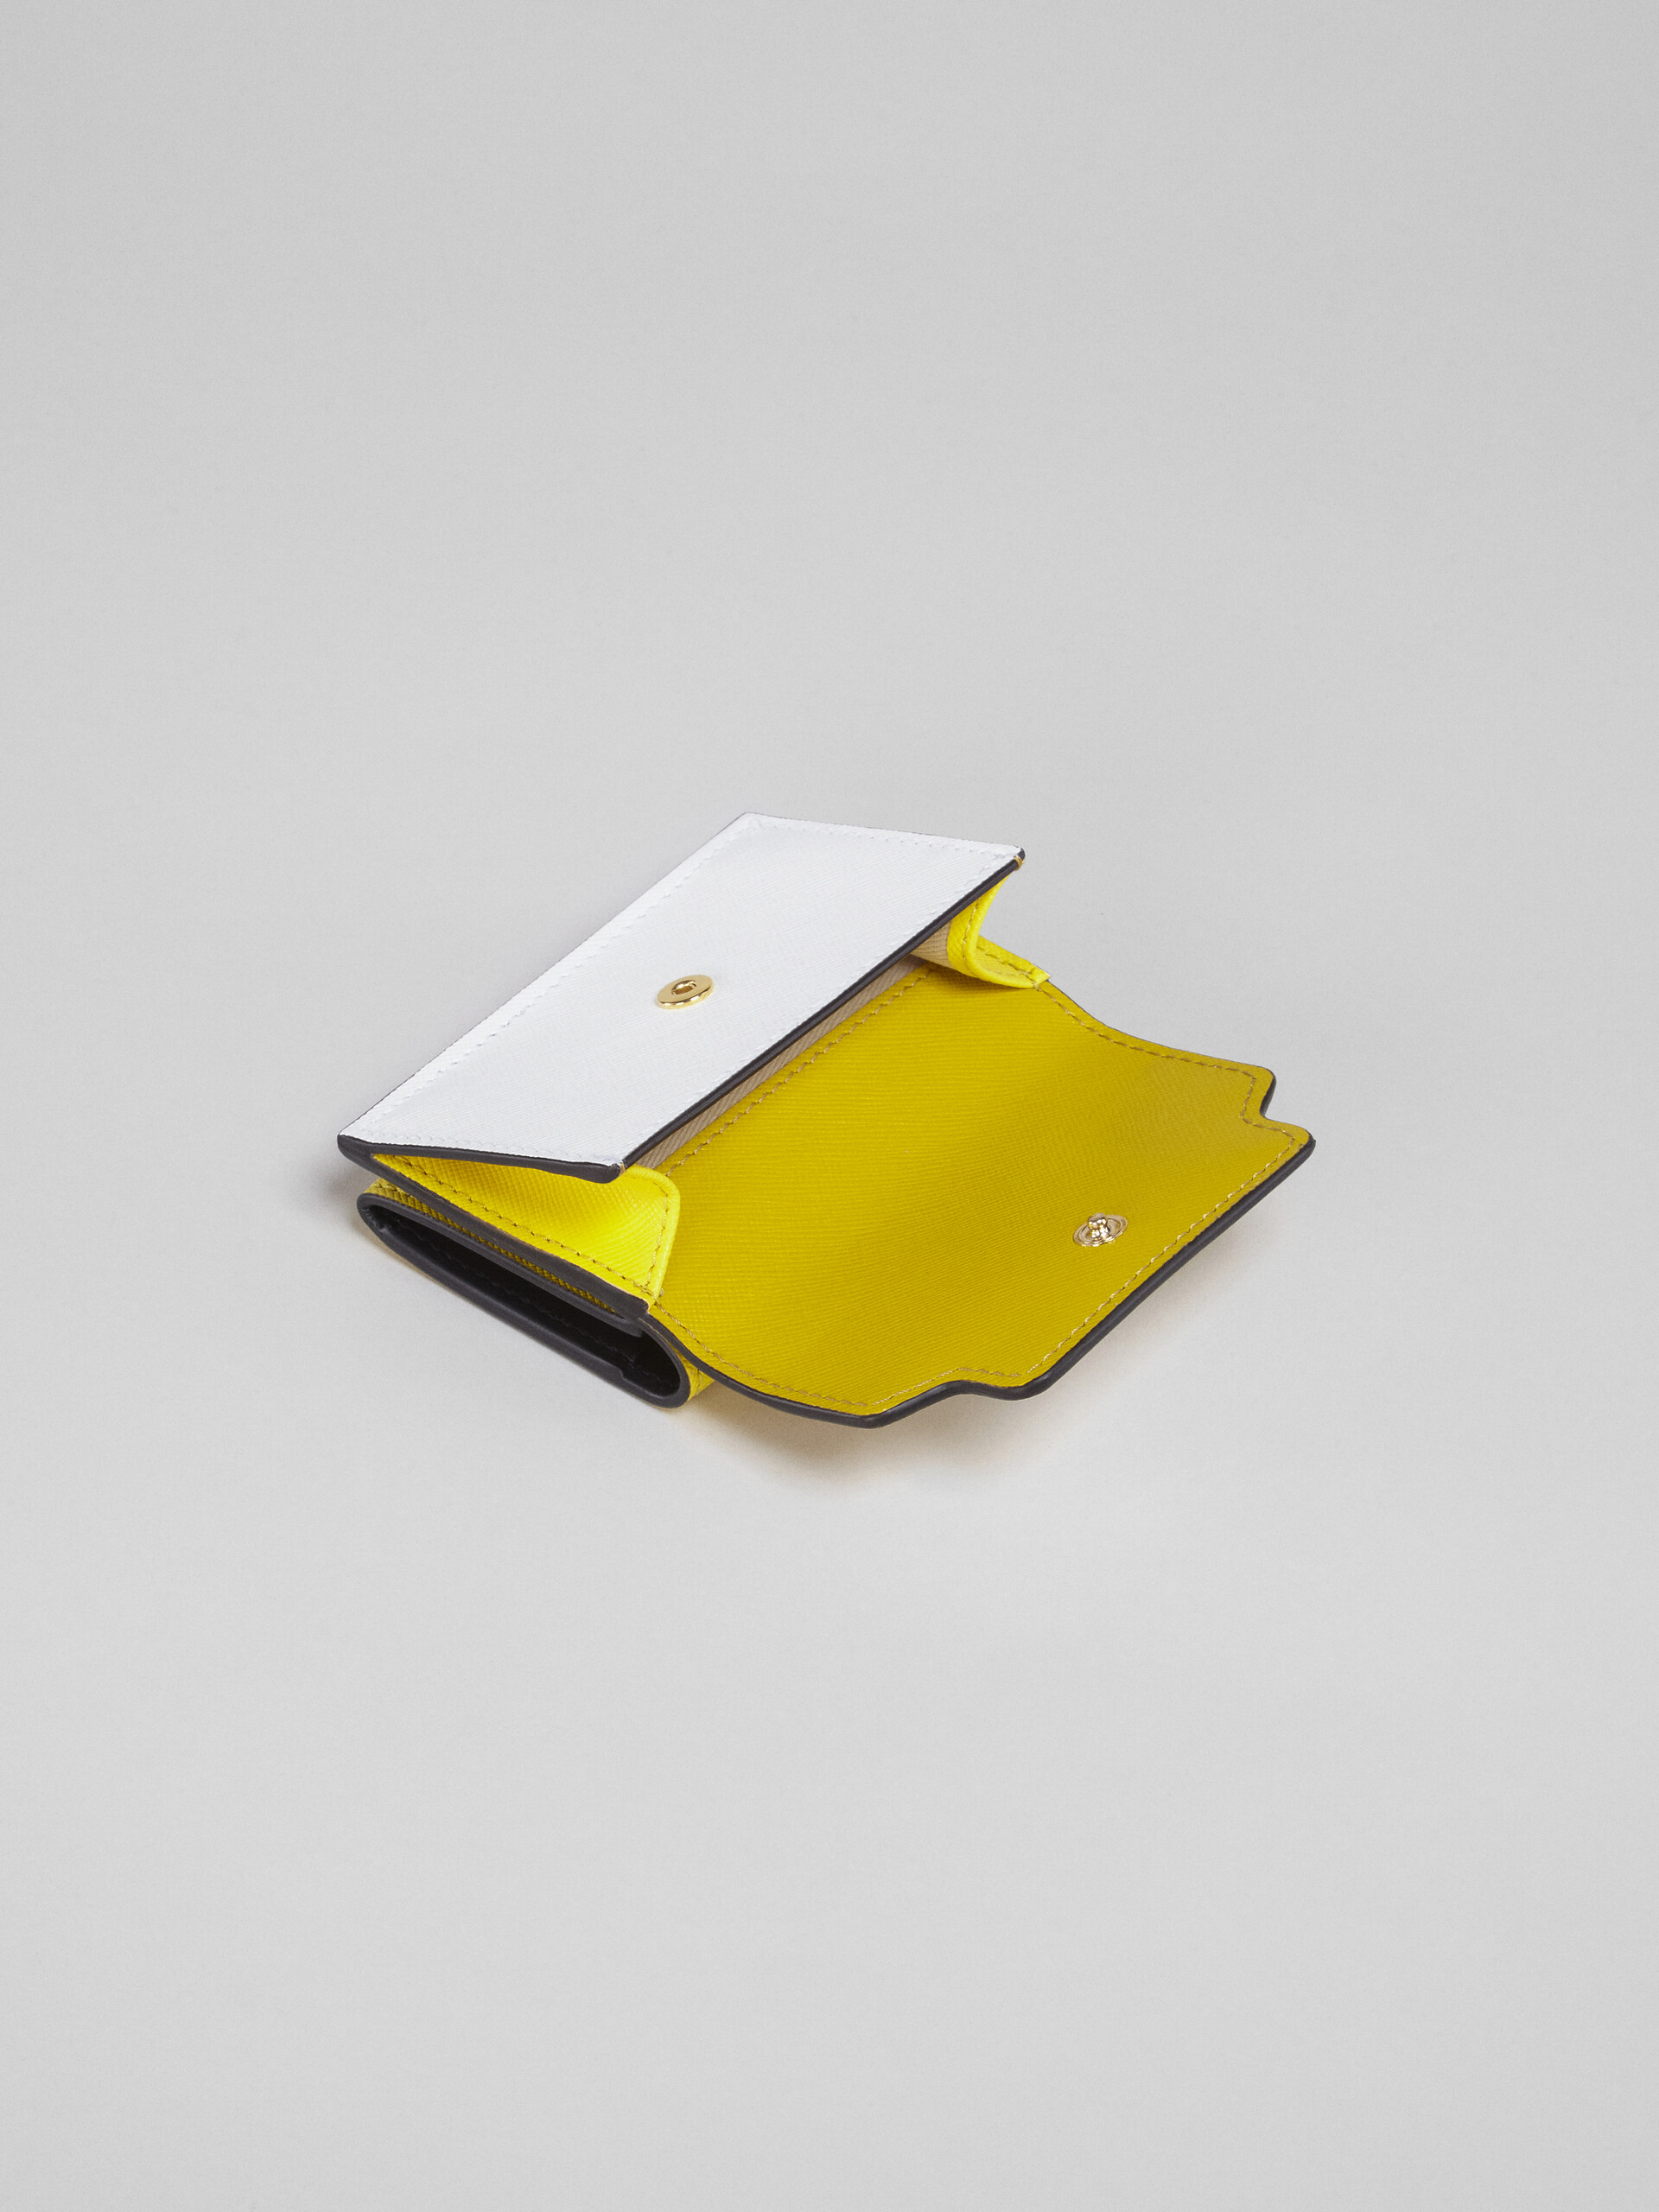 Tone on tone yellow and white tri-fold saffiano leather wallet - Wallets - Image 5